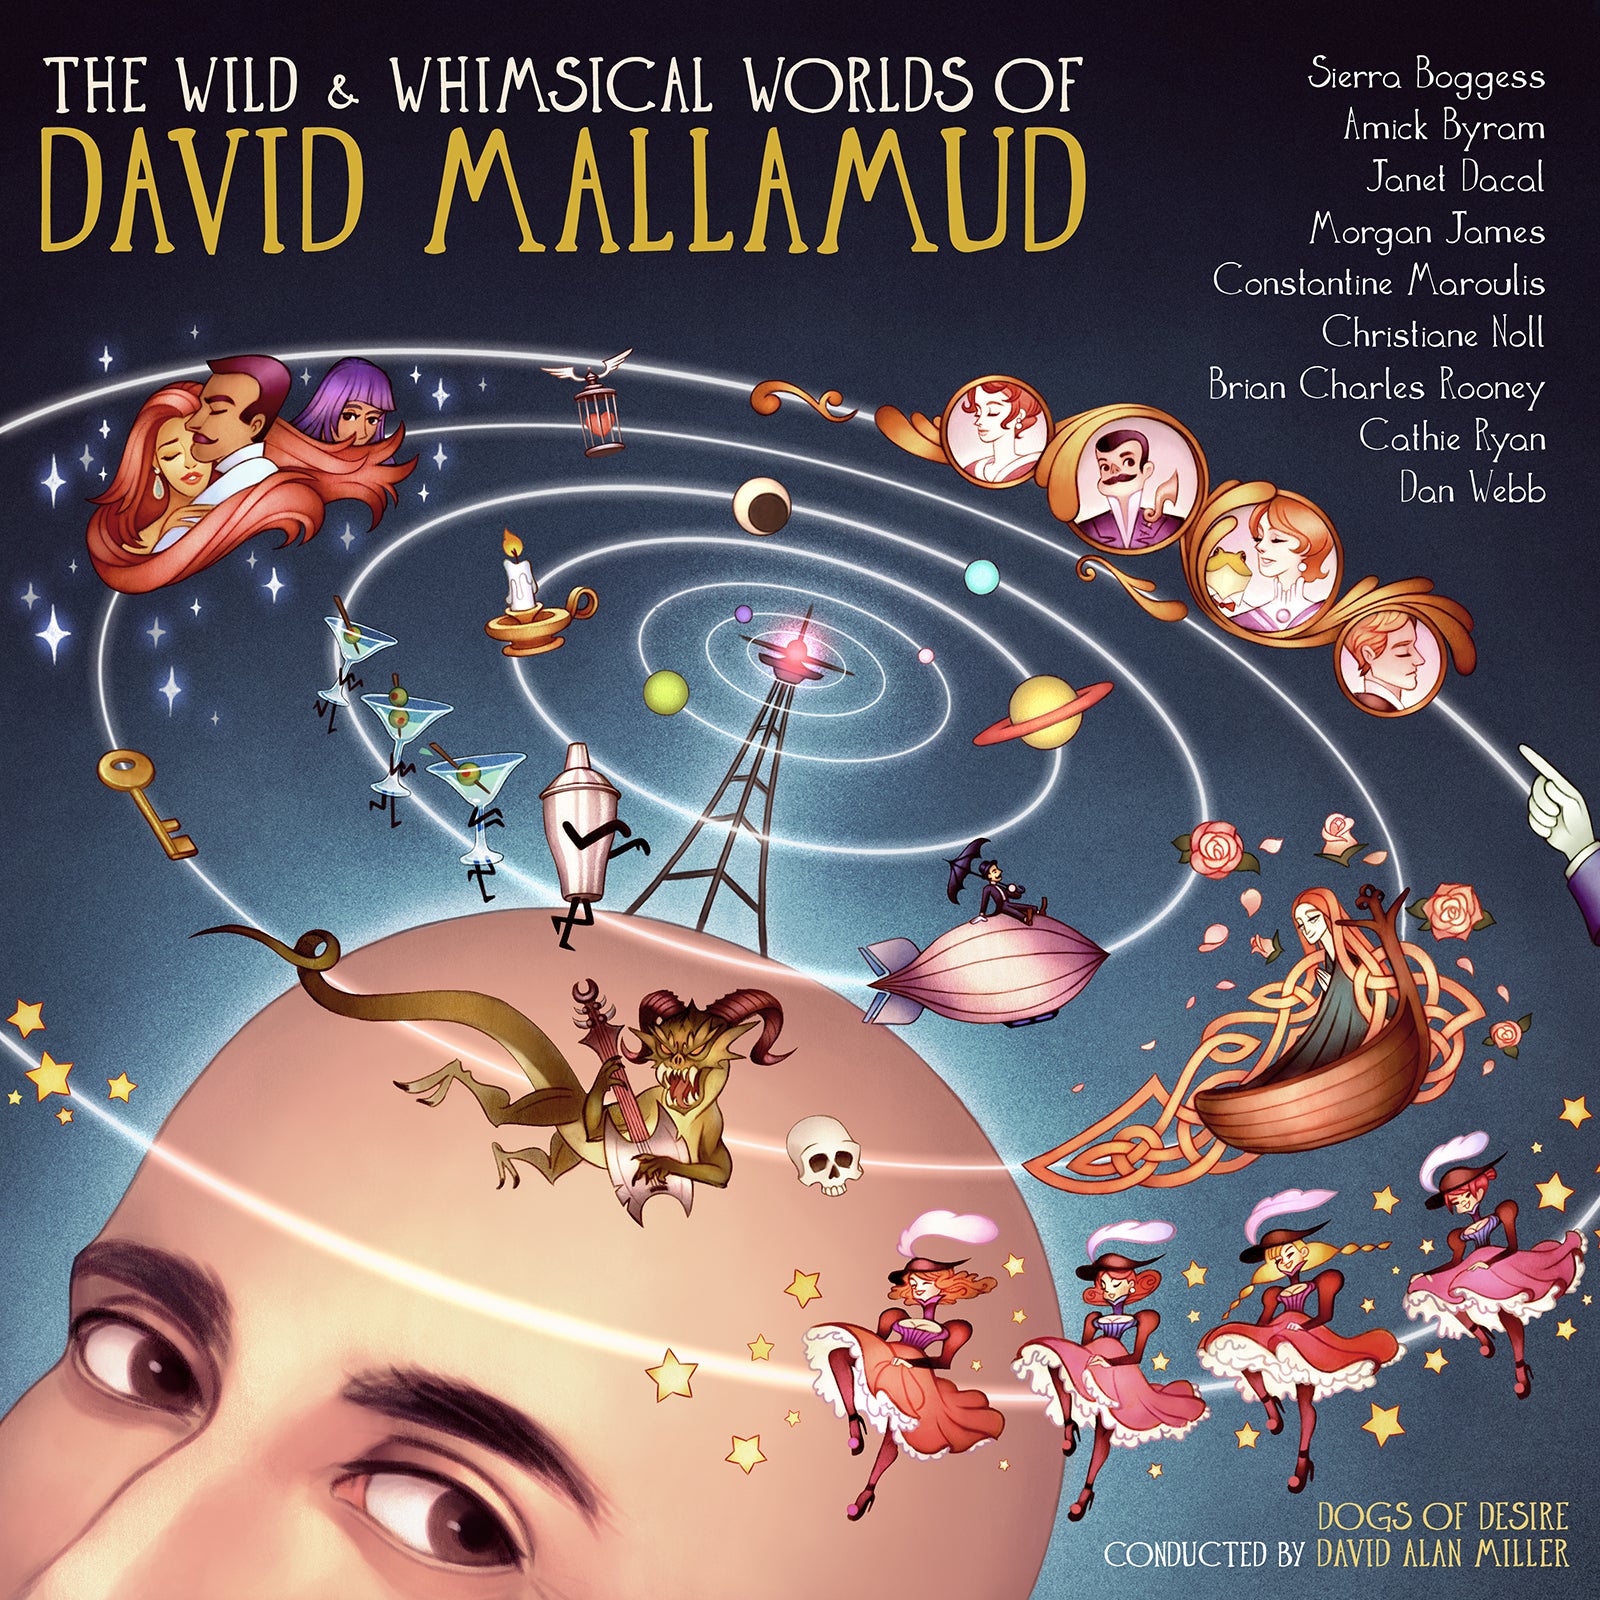 The Wild and Whimsical Worlds of David Mallamud [CD]